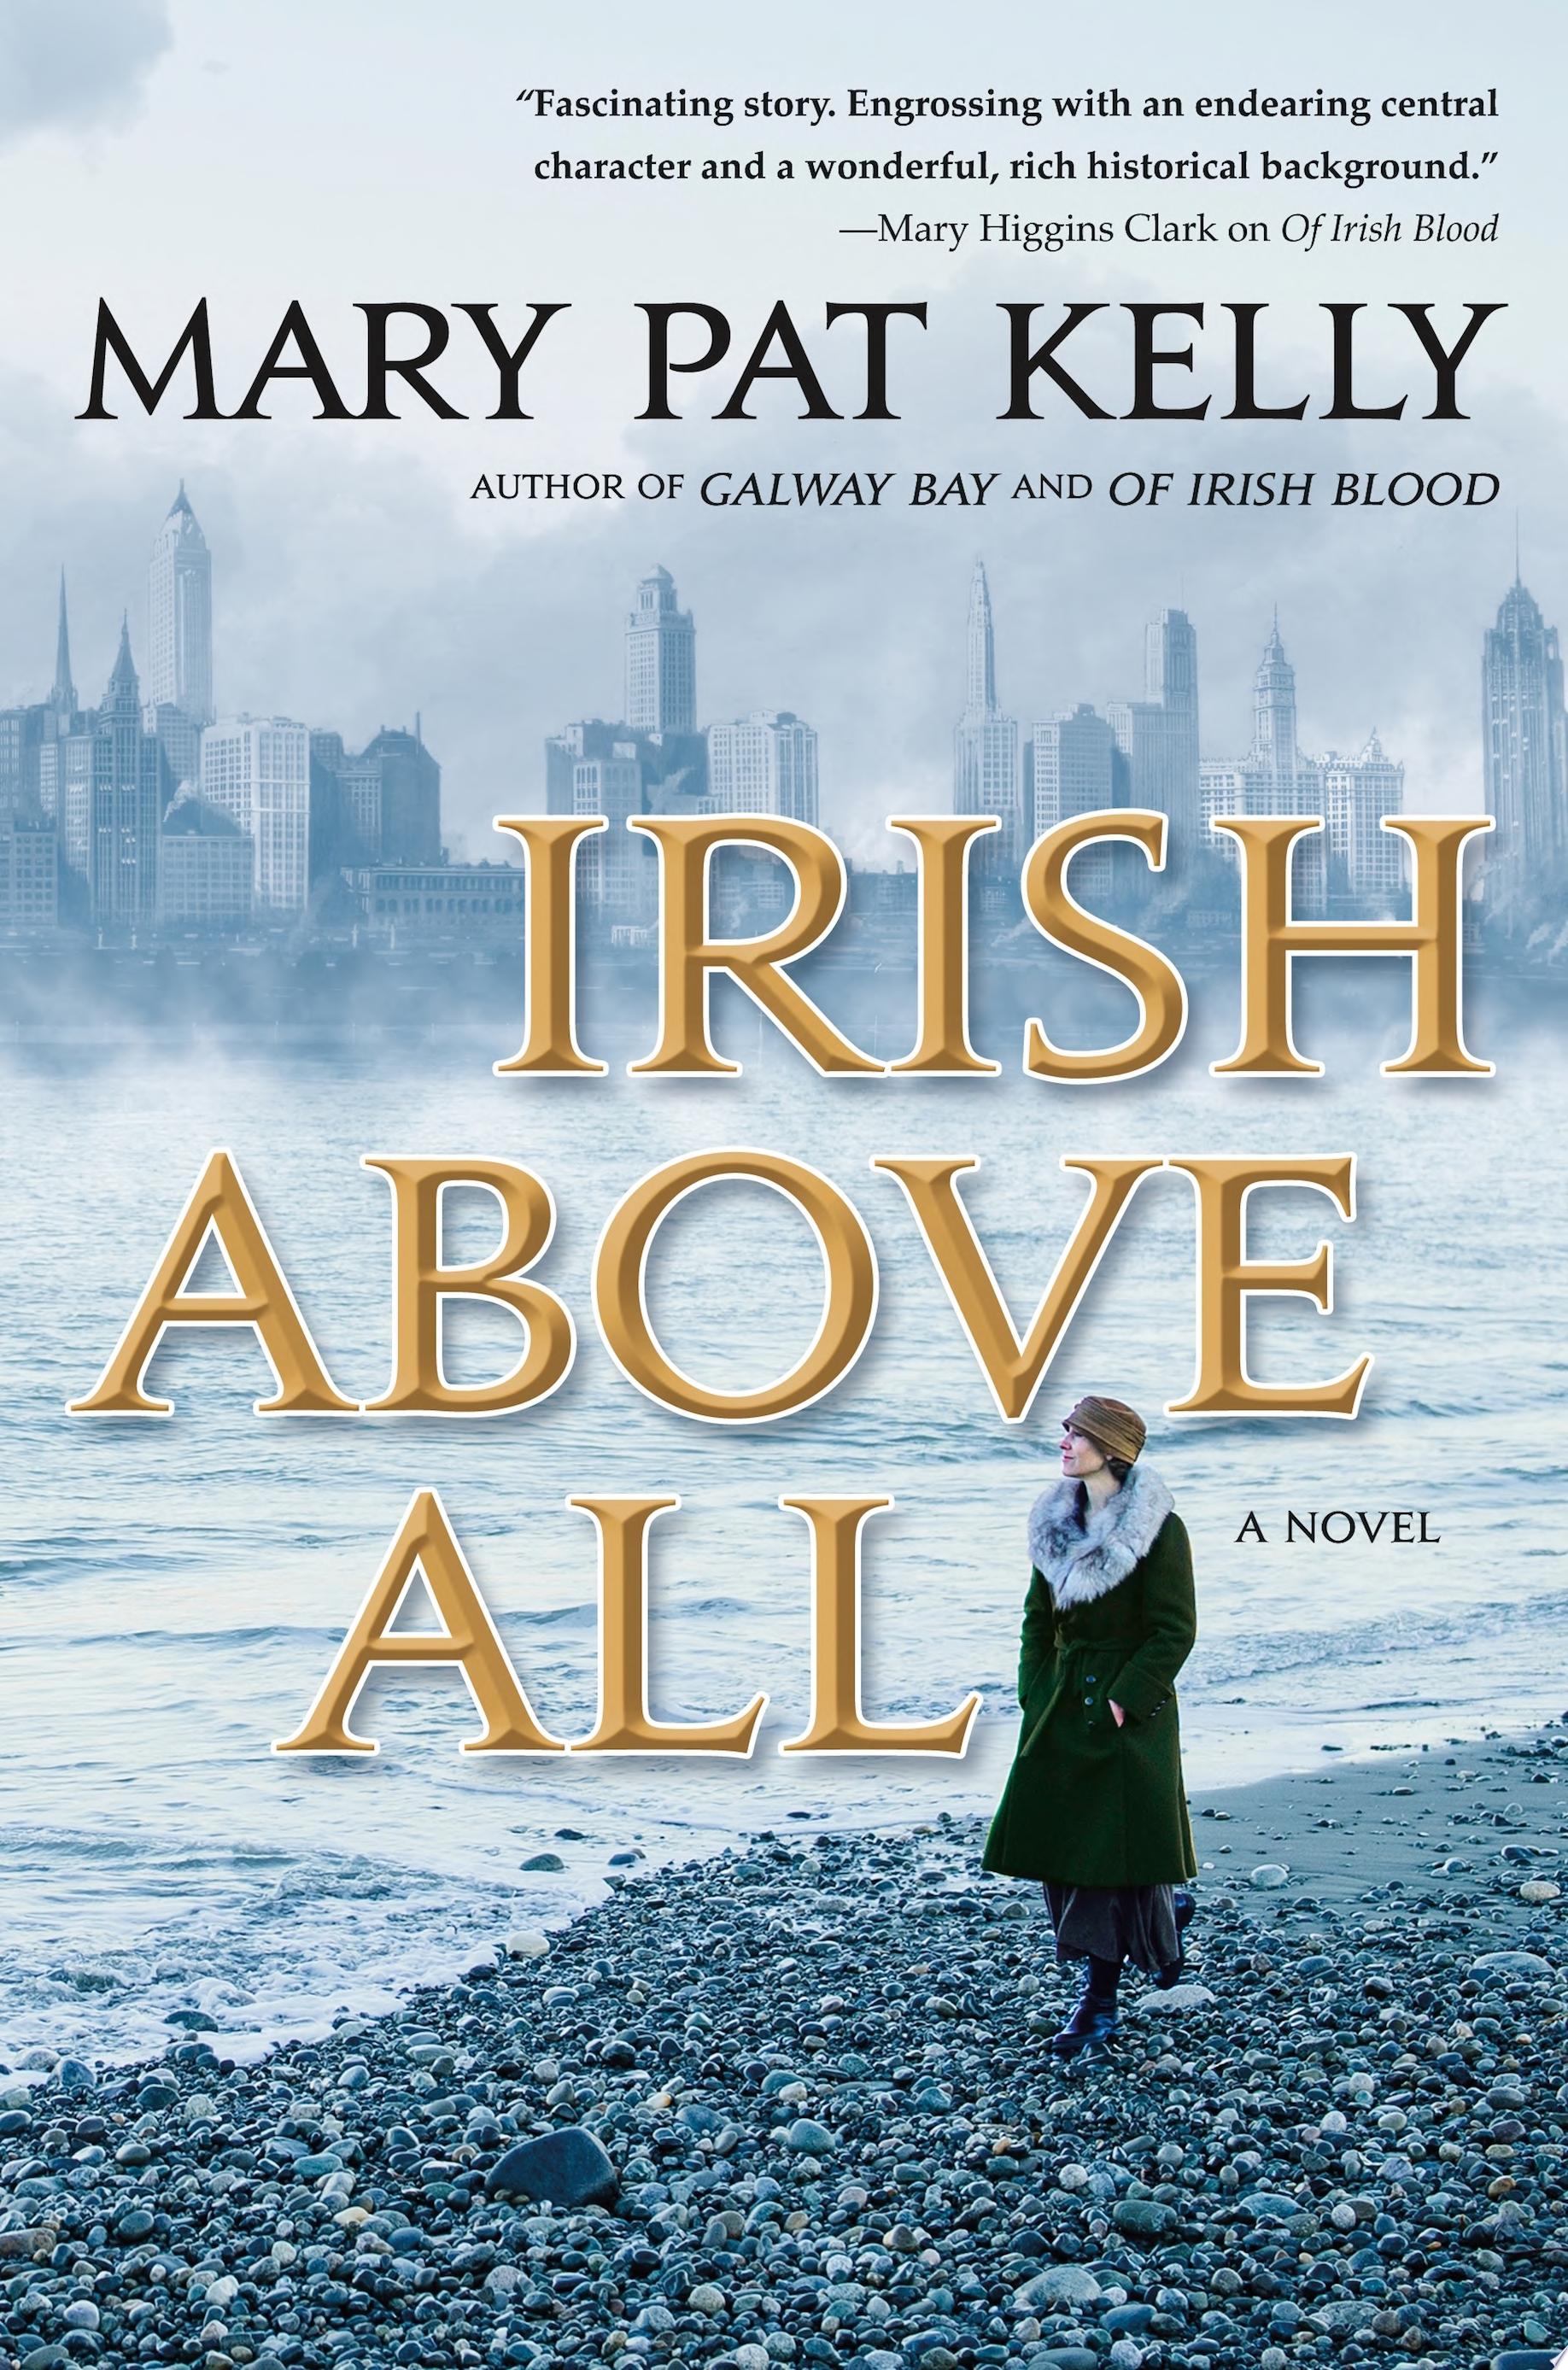 Image for "Irish Above All"